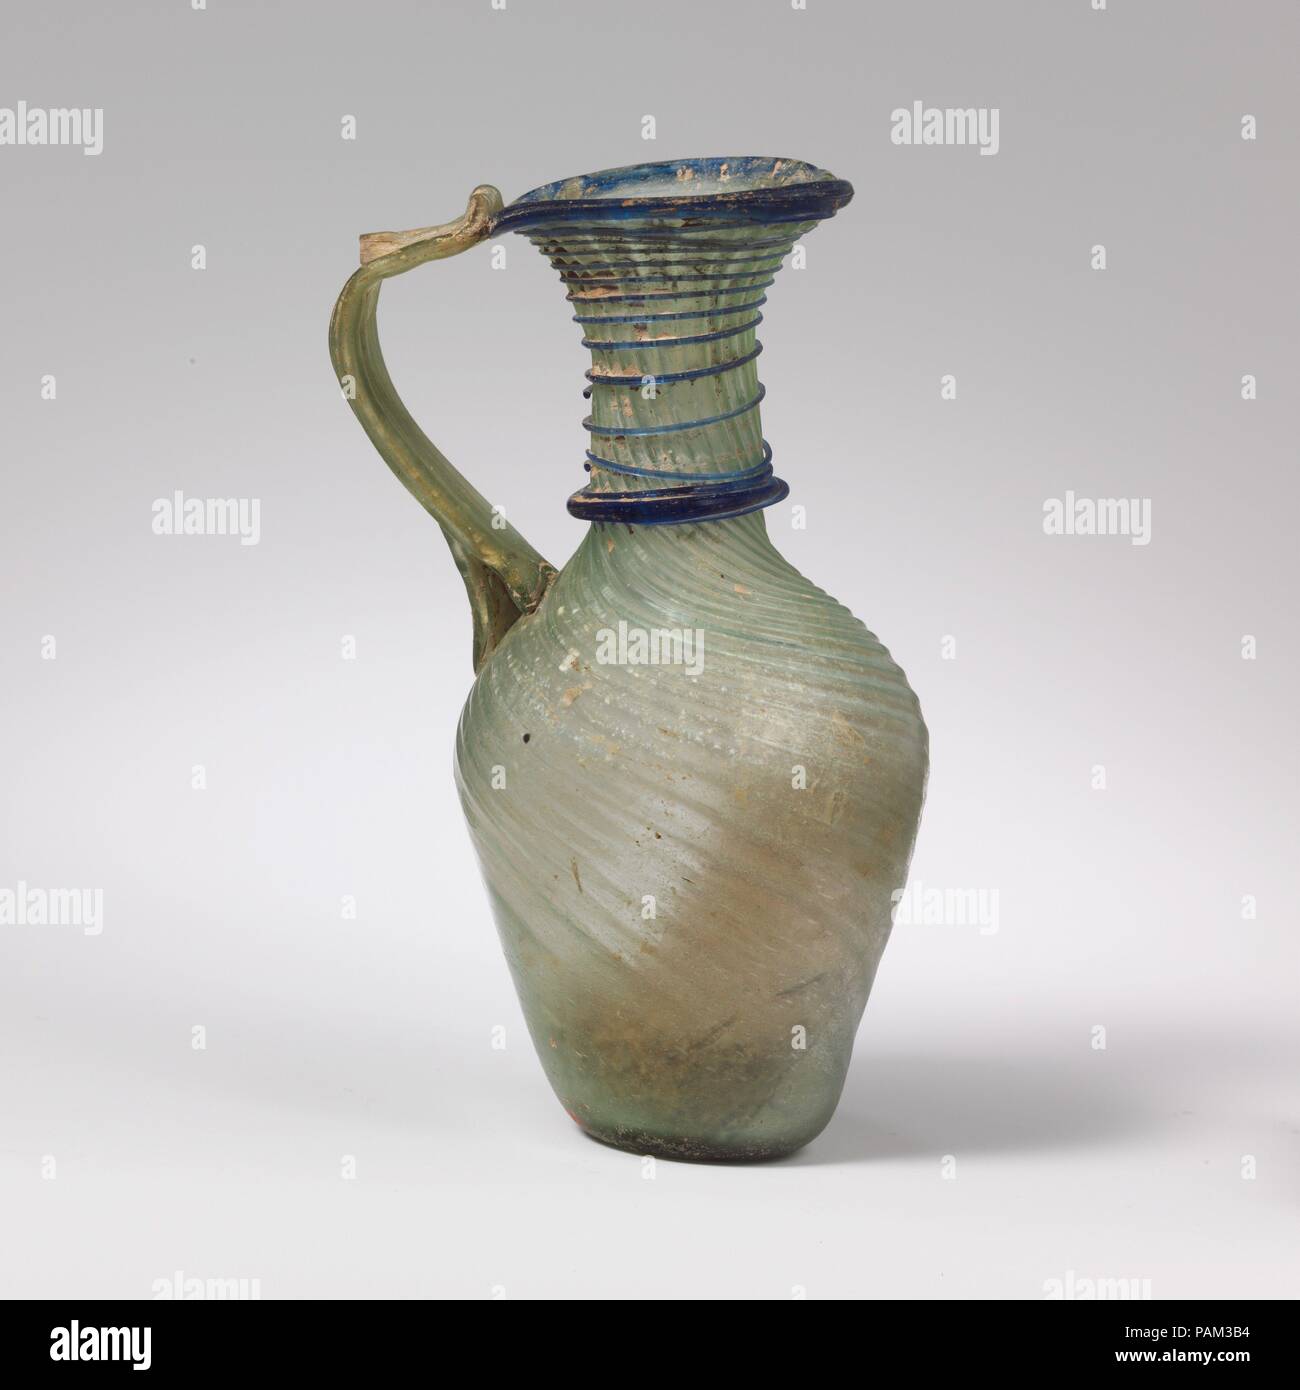 Glass jug. Culture: Roman, Syrian. Dimensions: H.: 4 11/16 in. (11.9 cm). Date: 4th-6th century A.D..  Translucent blue green; handle in same color; trails in translucent cobalt blue.  Plain rim, with downward flange on one side; flaring mouth; cylindrical neck, expanding slightly downwards; slanting, rounded shoulder; funnel-shaped body;  thick bottom with kick and small, central pontil scar; reeded strap handle attached unevenly to shoulder, drawn up and outwards in a curve, then attached to edge of rim and trailed back on itself.  Narrow ribs extend in a tight spiral down from left to right Stock Photo